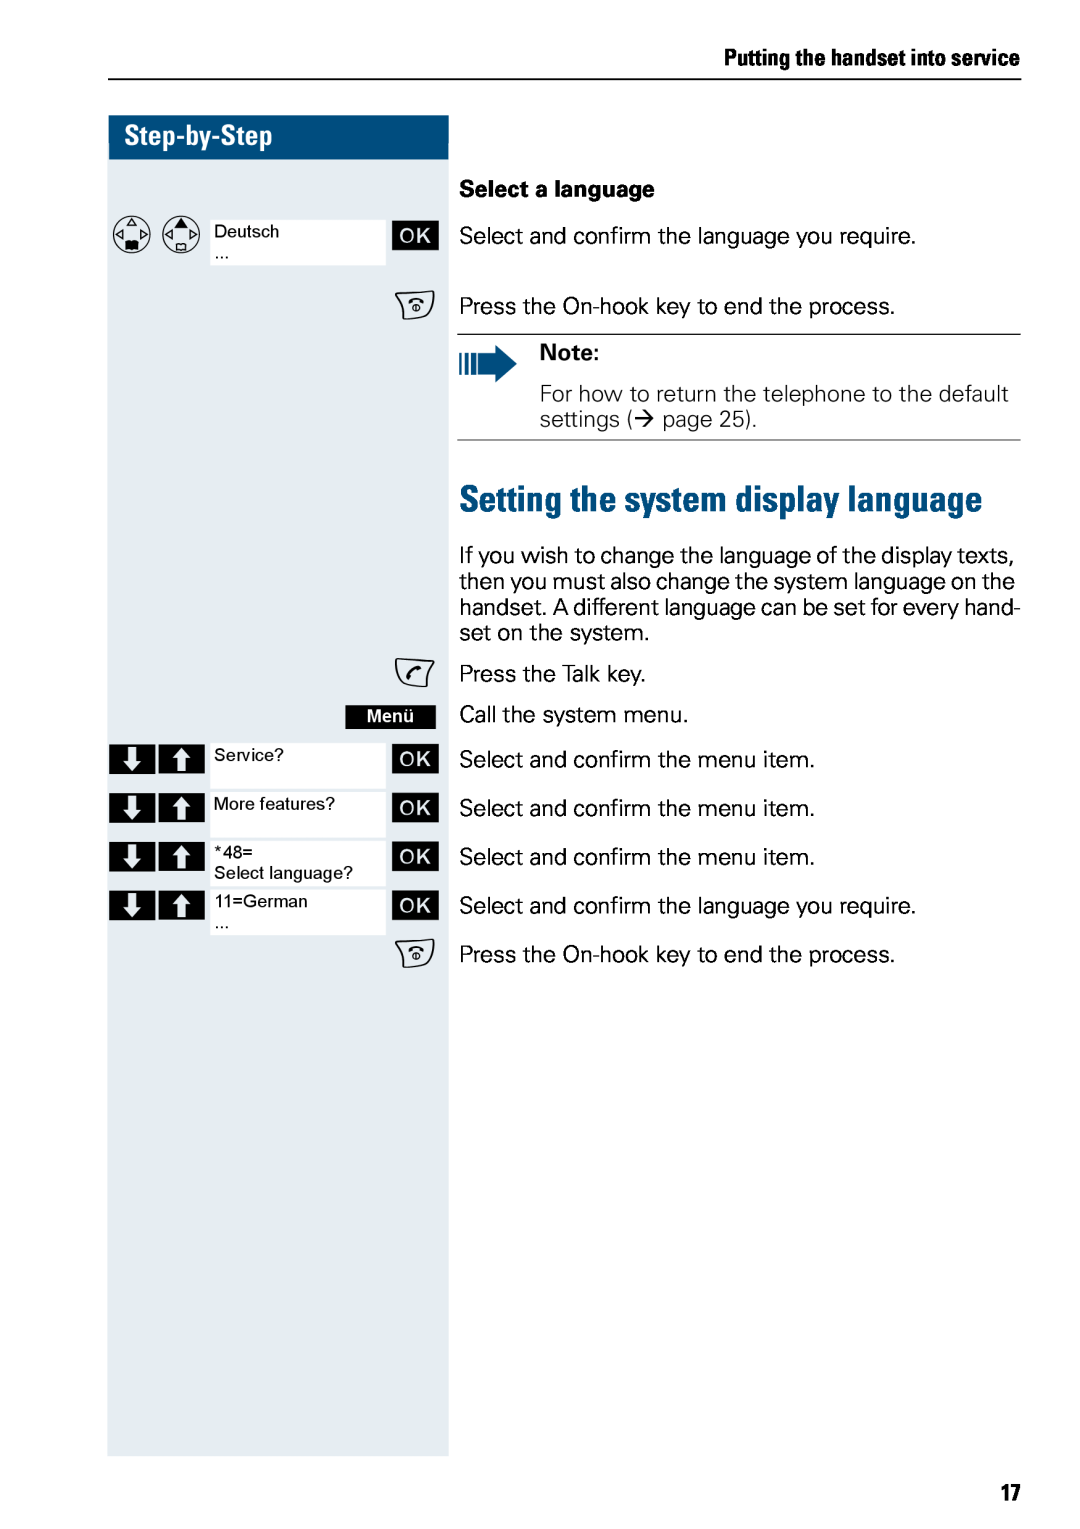 Siemens 3000 V3.0 Setting the system display language, Step-by-Step, Putting the handset into service, Select a language 